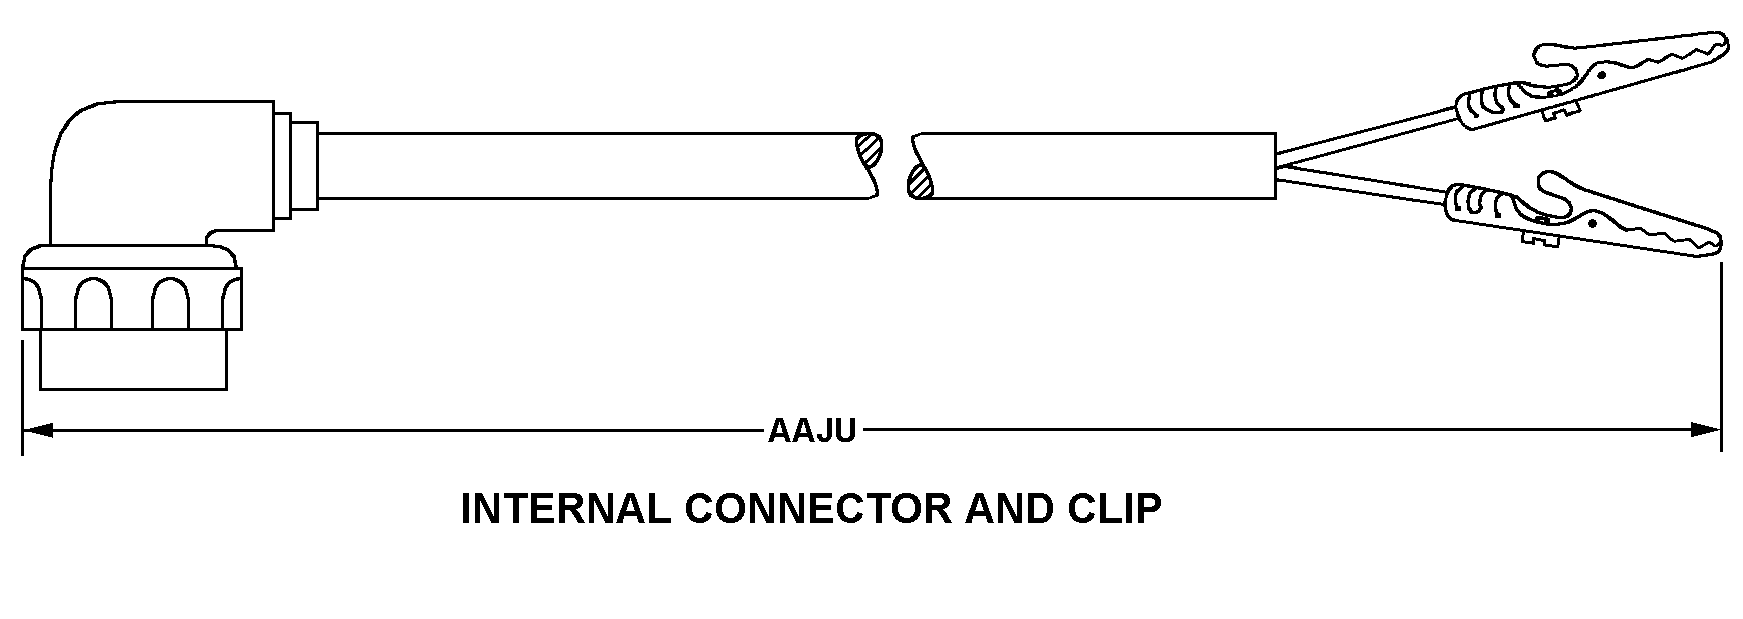 INTERNAL CONNECTOR AND CLIP style nsn 5995-00-489-0420